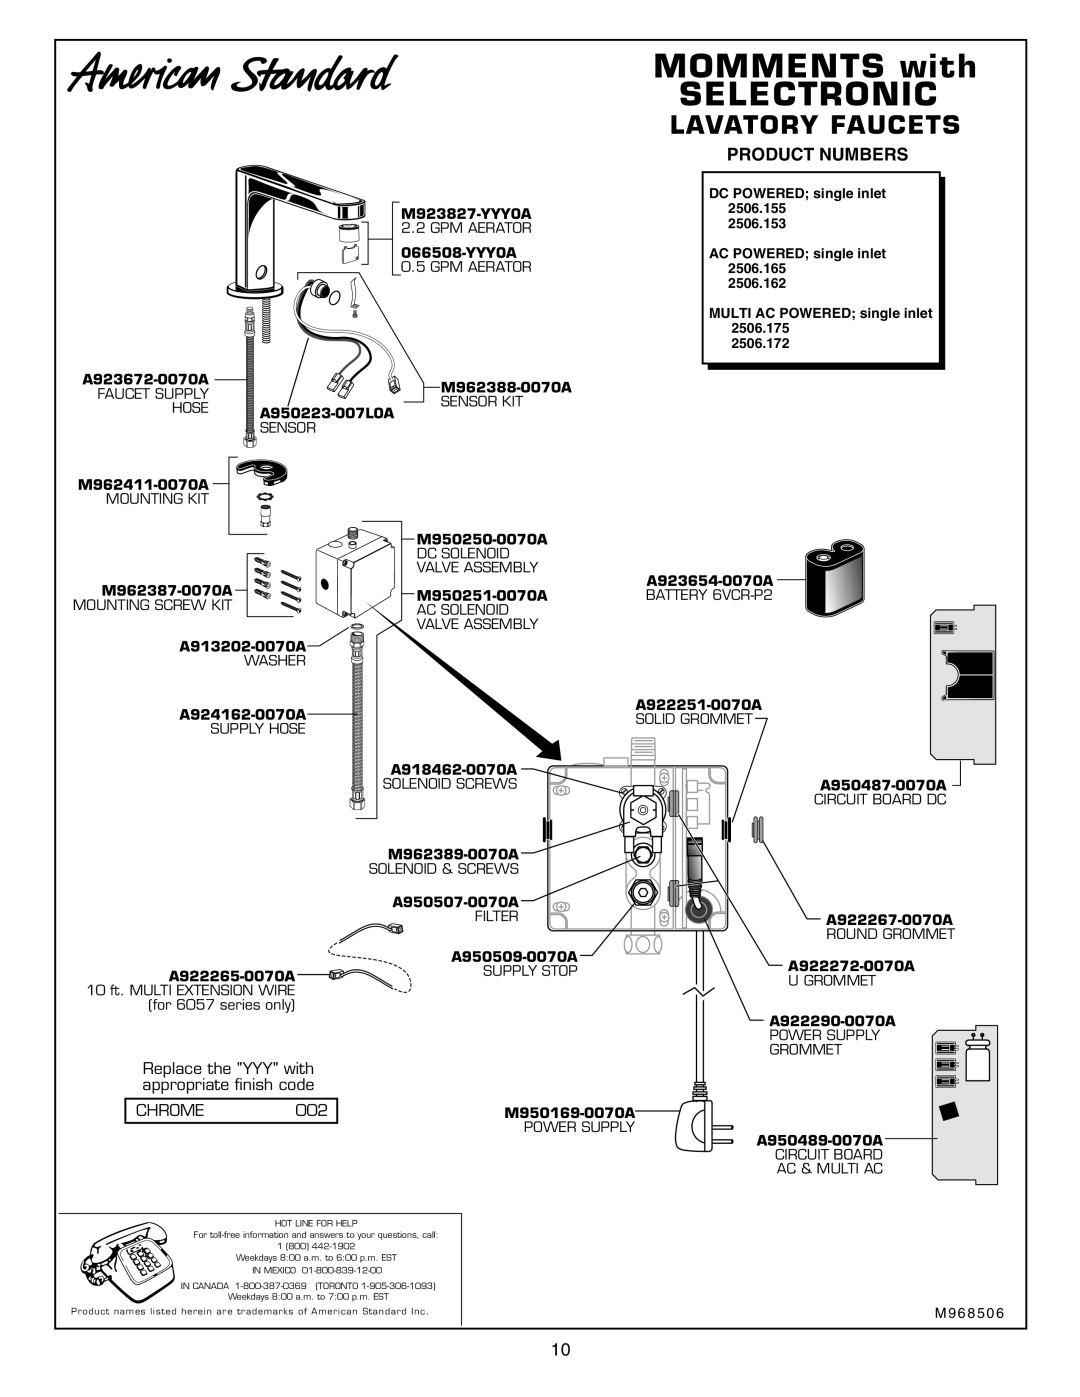 American Standard M962411-0070A, M968506 manual MOMMENTS with SELECTRONIC, Lavatory Faucets, Product Numbers, Chrome 